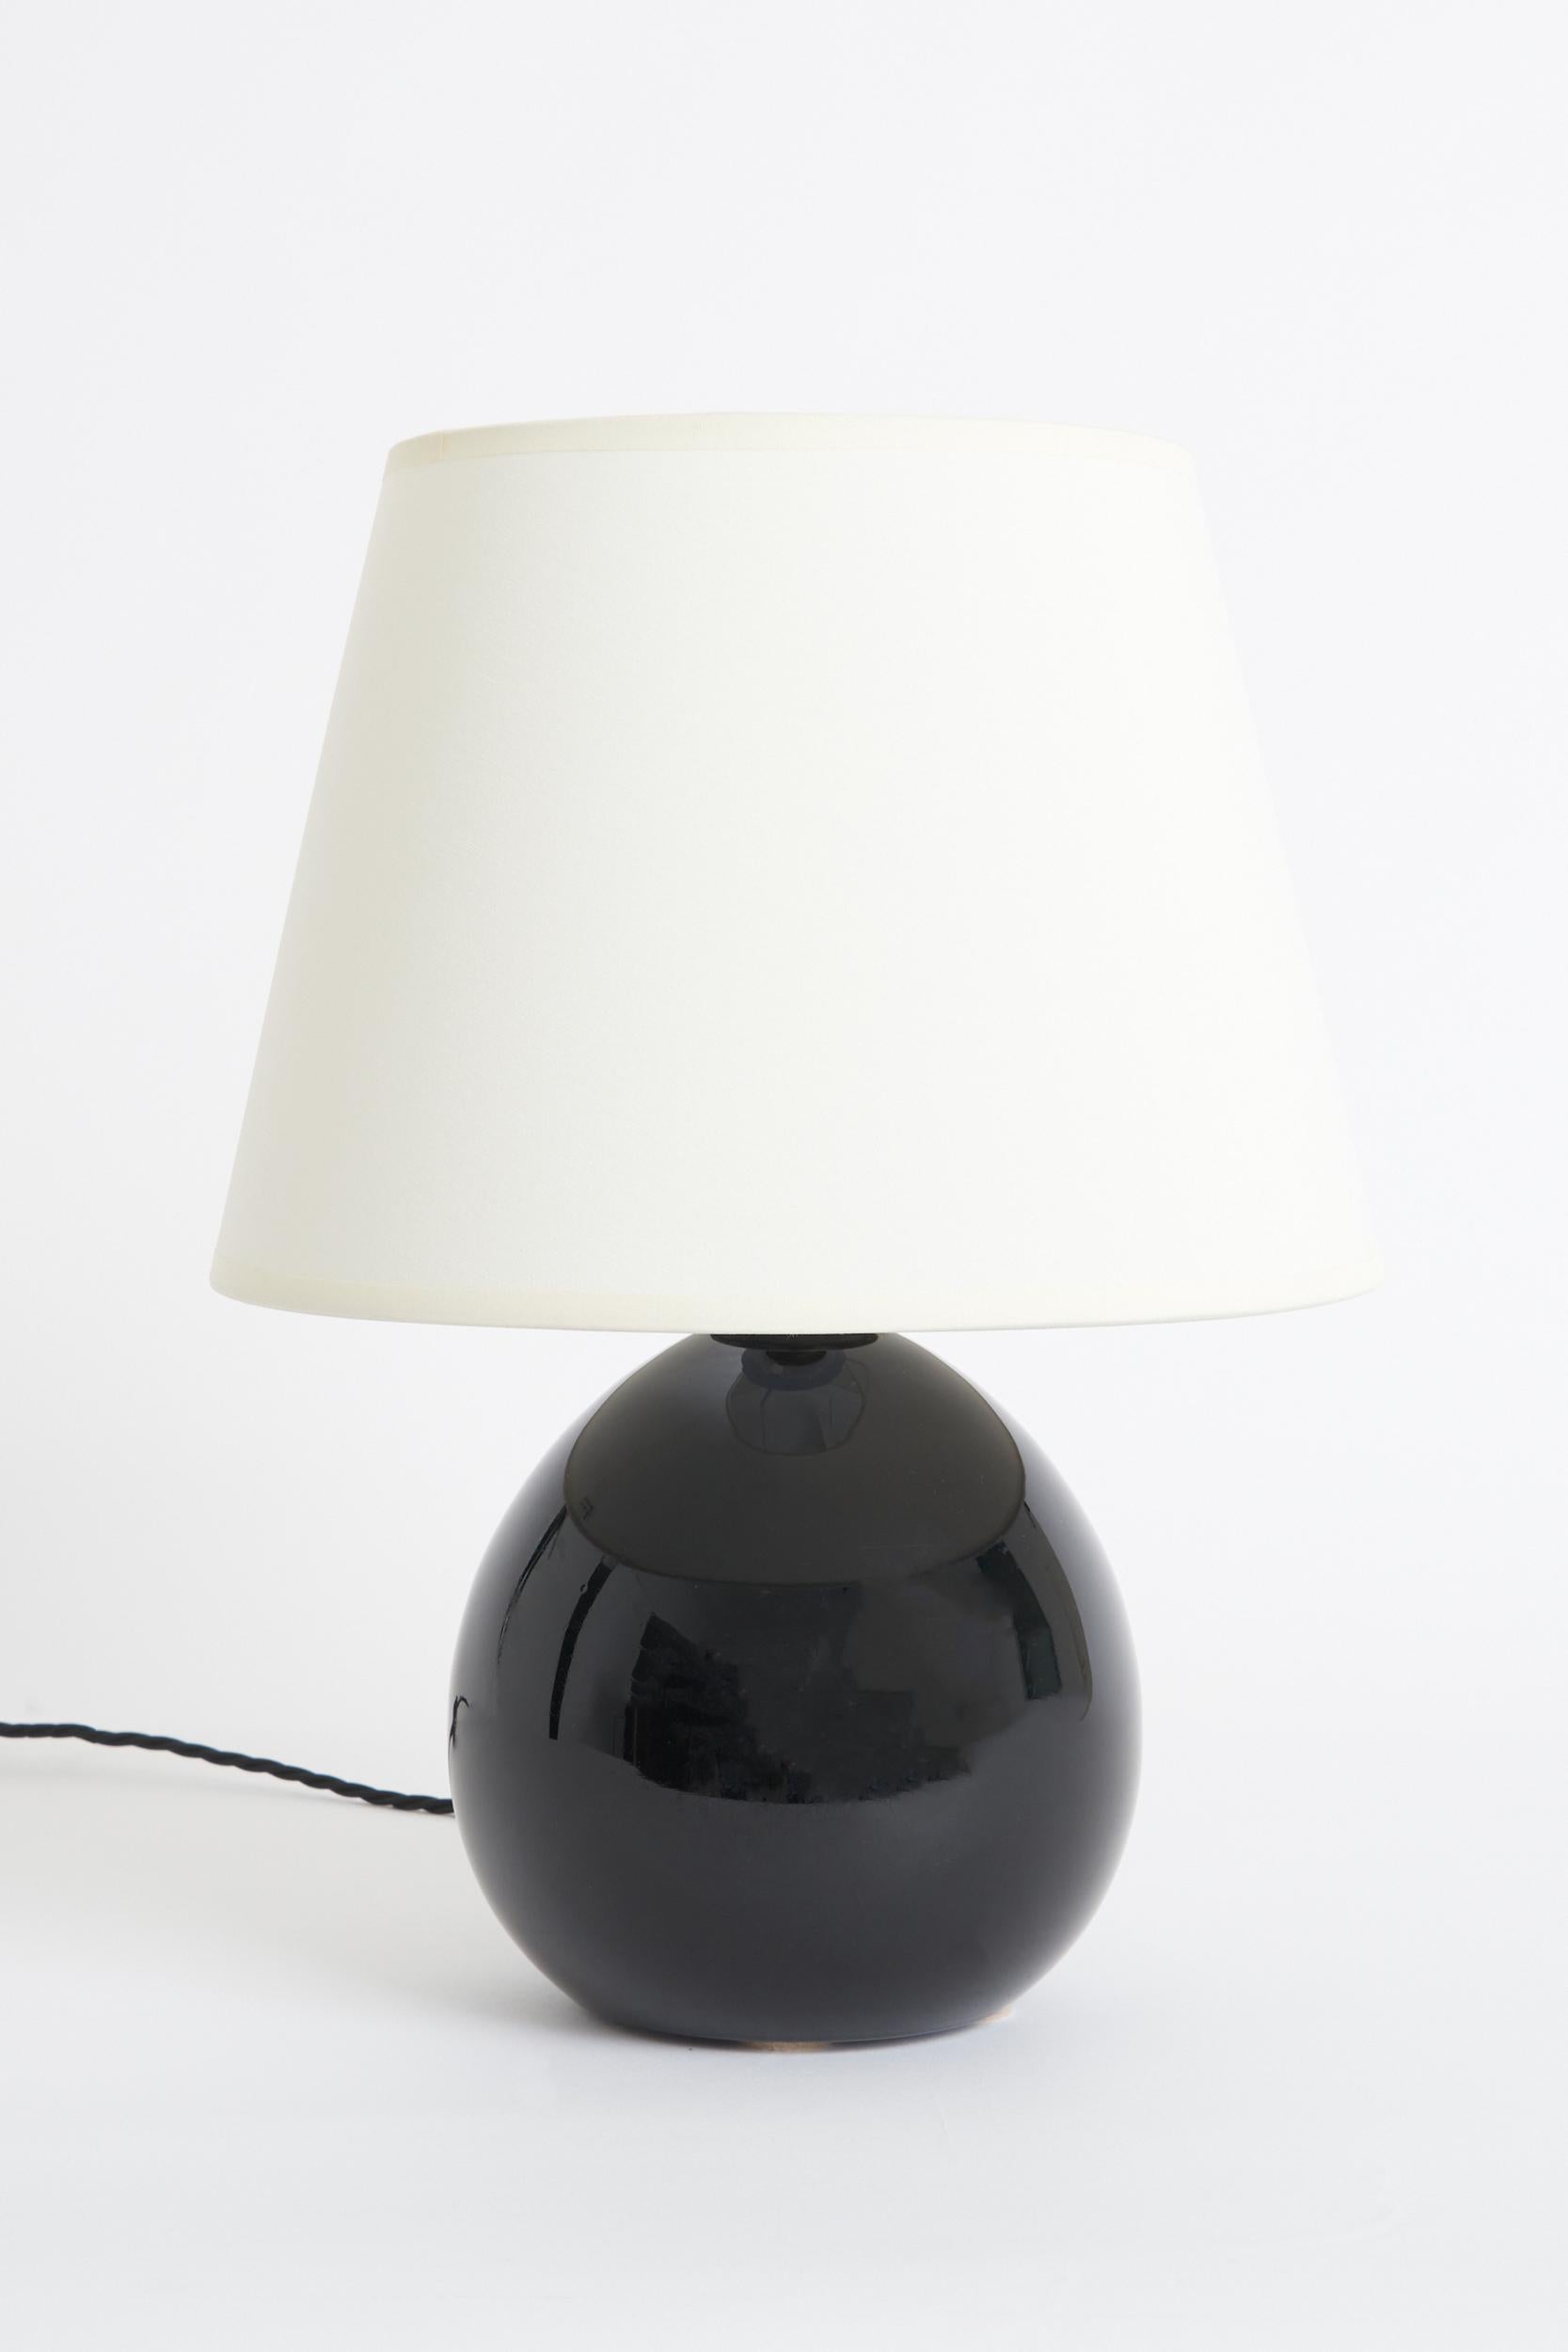 An Art Deco black opaline glass table lamp, probably by Jacques Adnet (1900-1984).
France, Circa 1930
With the shade: 41 cm high by 30.5 cm diameter
Lamp base only: 24.5 cm high by 18 cm diameter